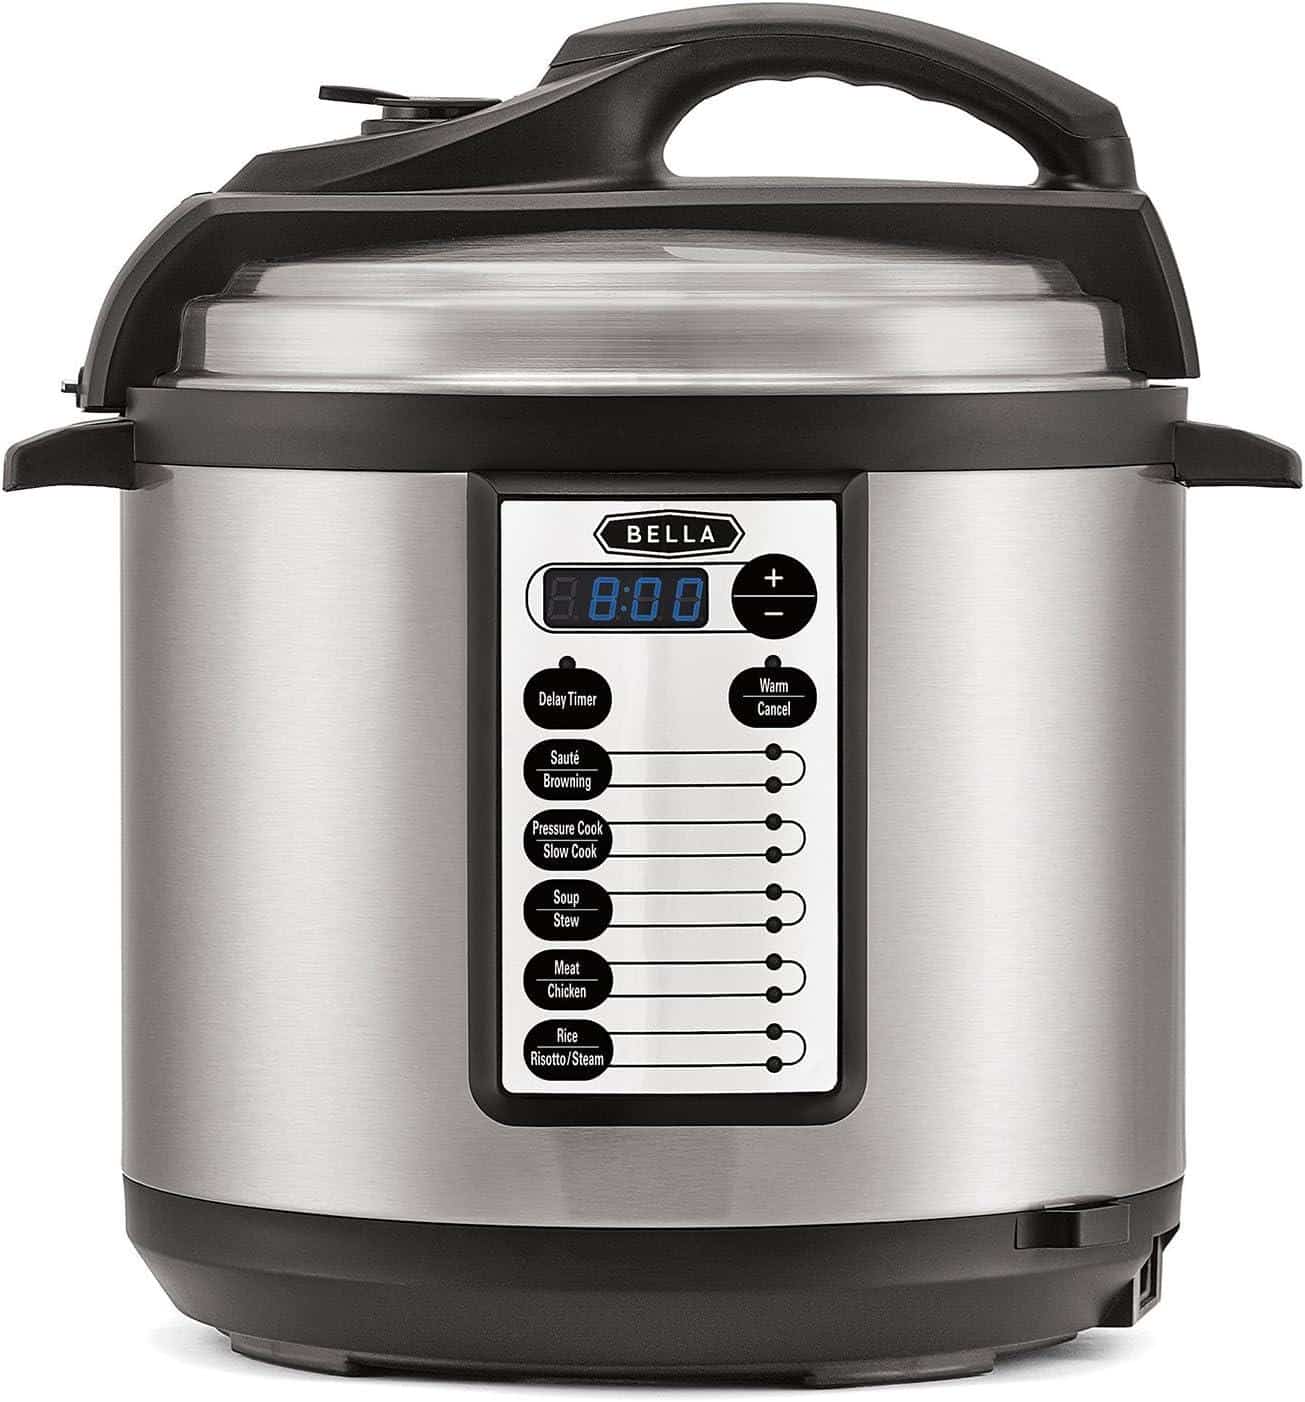  Sensio Recalls Bella, Bella Pro Series, Cooks and Crux Electric and Stovetop Pressure Cookers Due to Burn Hazard